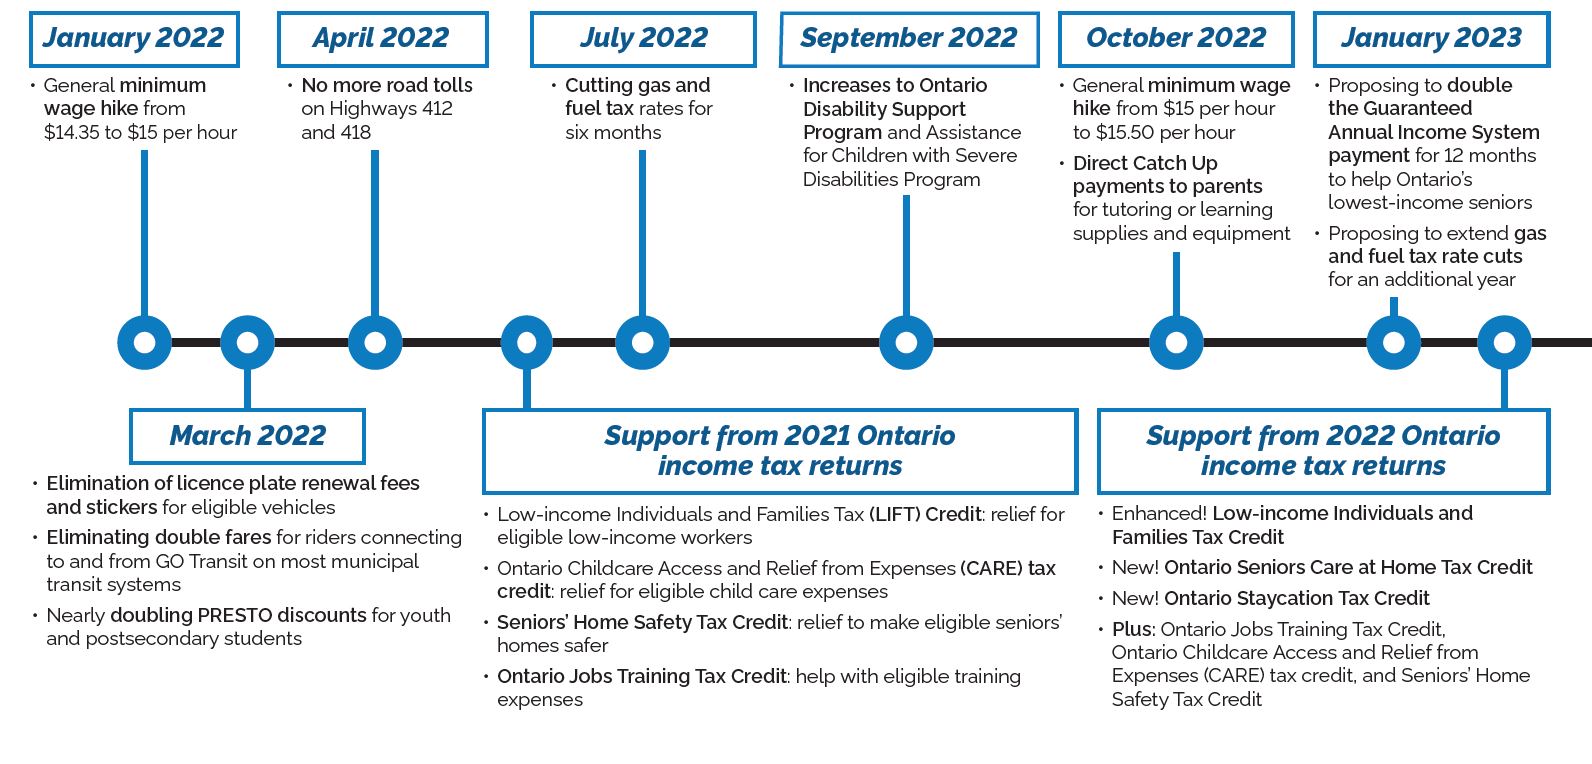 A timeline from January 2022 to mid-2023 showing measures by the Ontario government to keep costs down